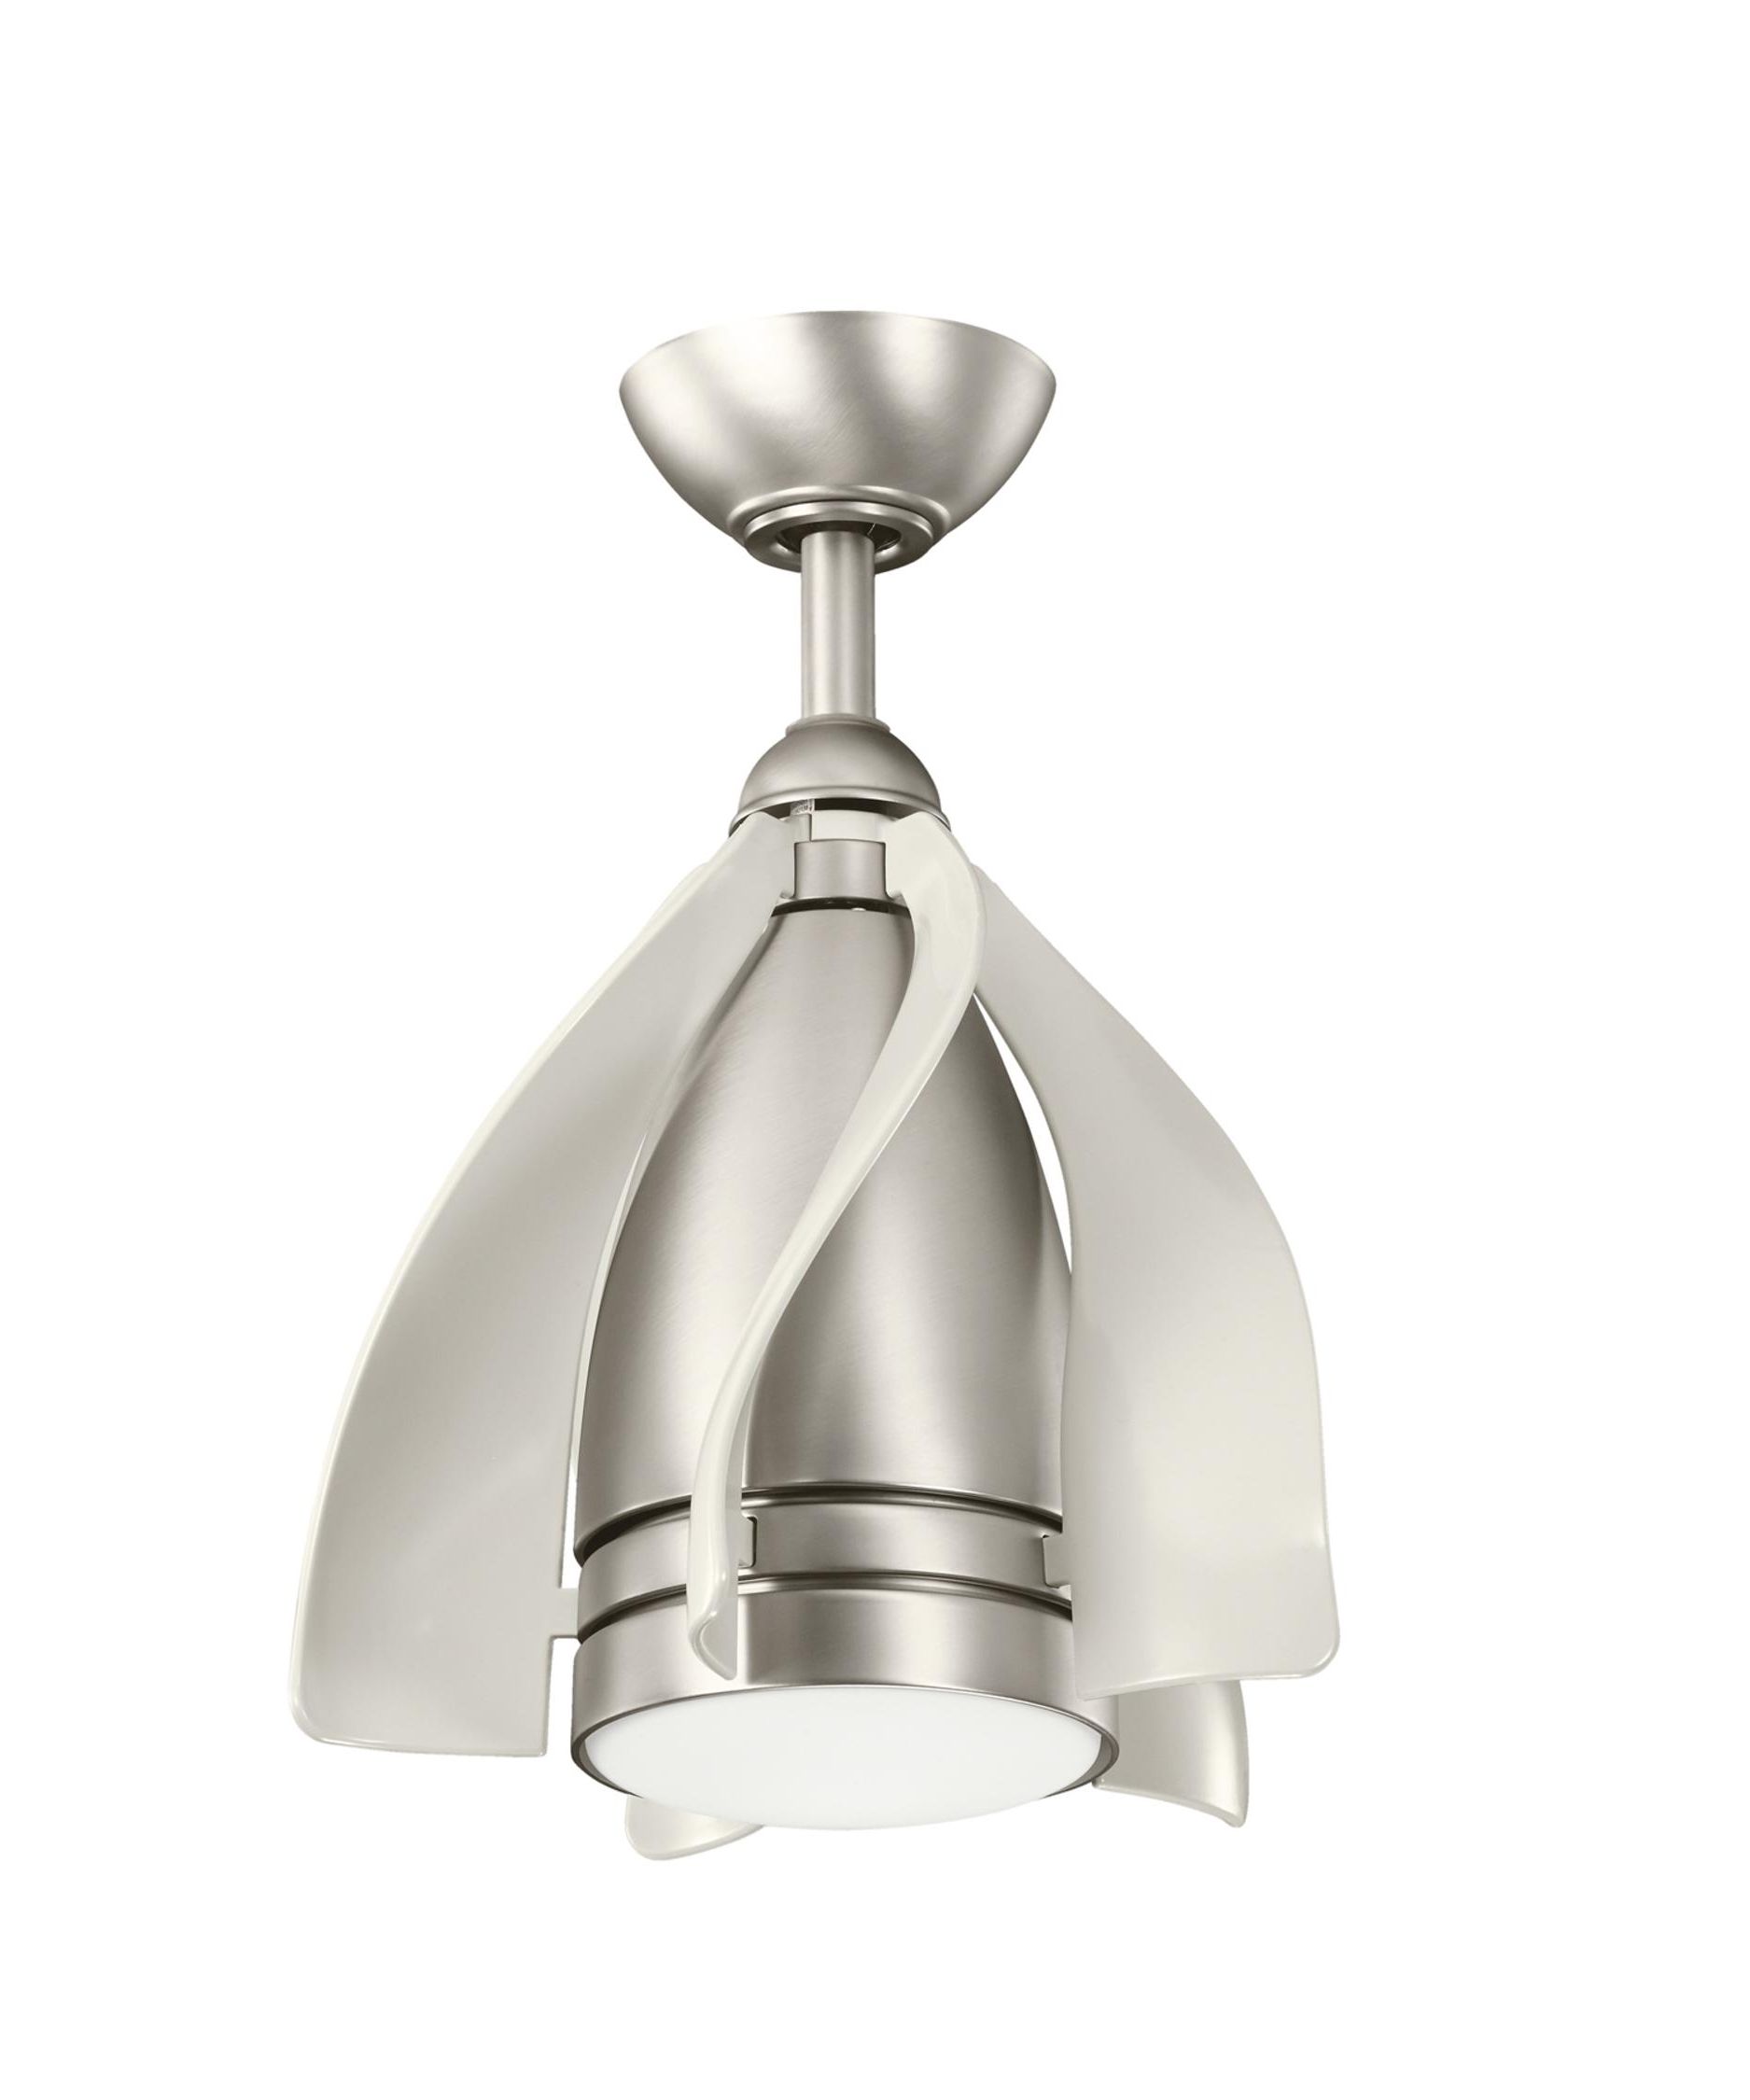 Capitol Lighting For Outdoor Ceiling Fans At Kichler (View 19 of 20)